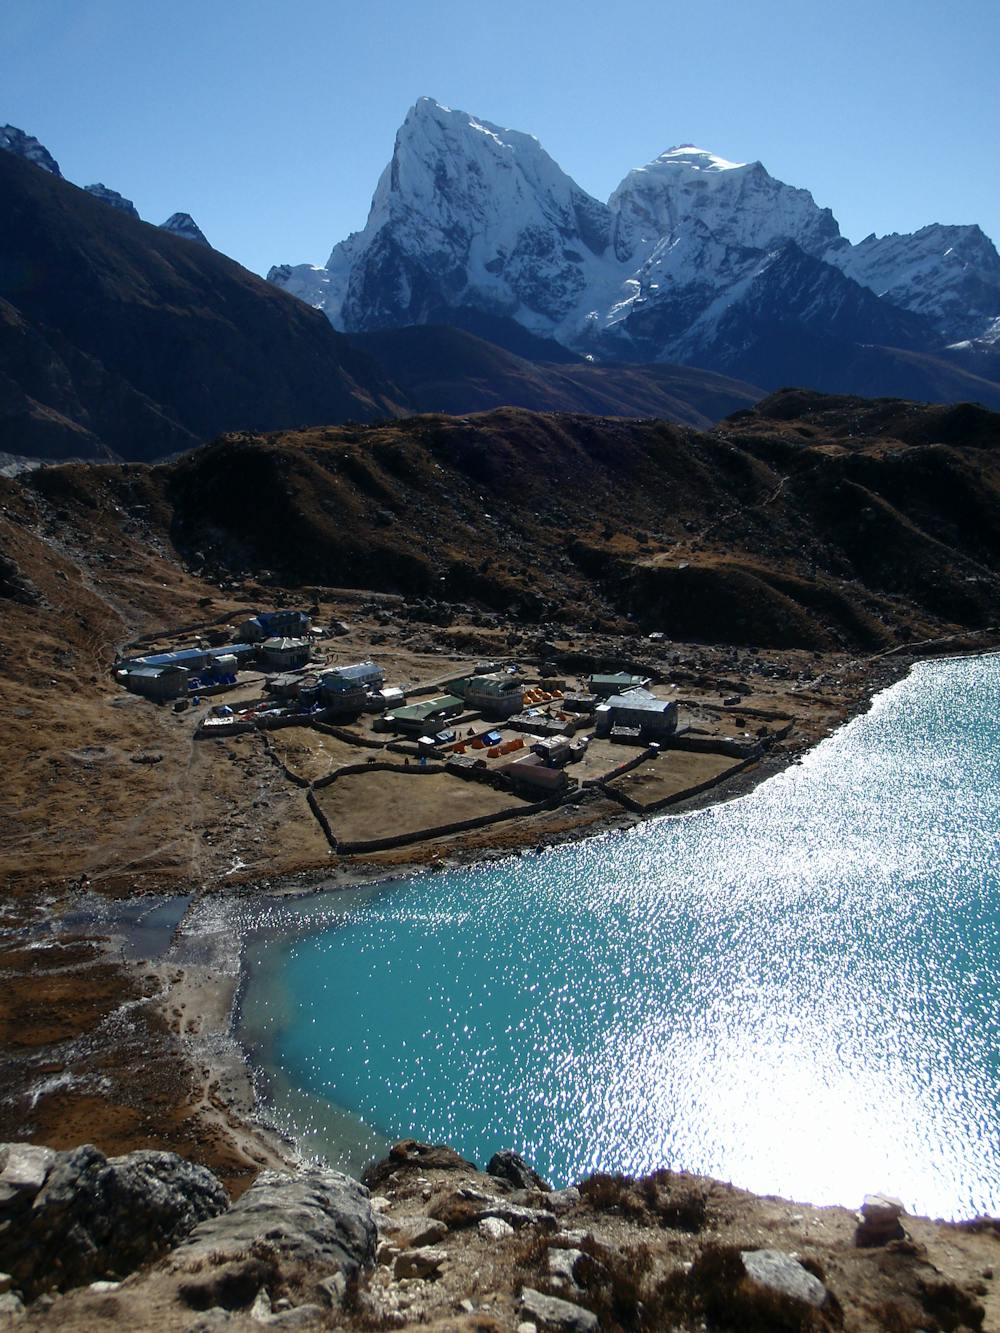 Looking down on Gokyo village on the descent from Gokyo Ri